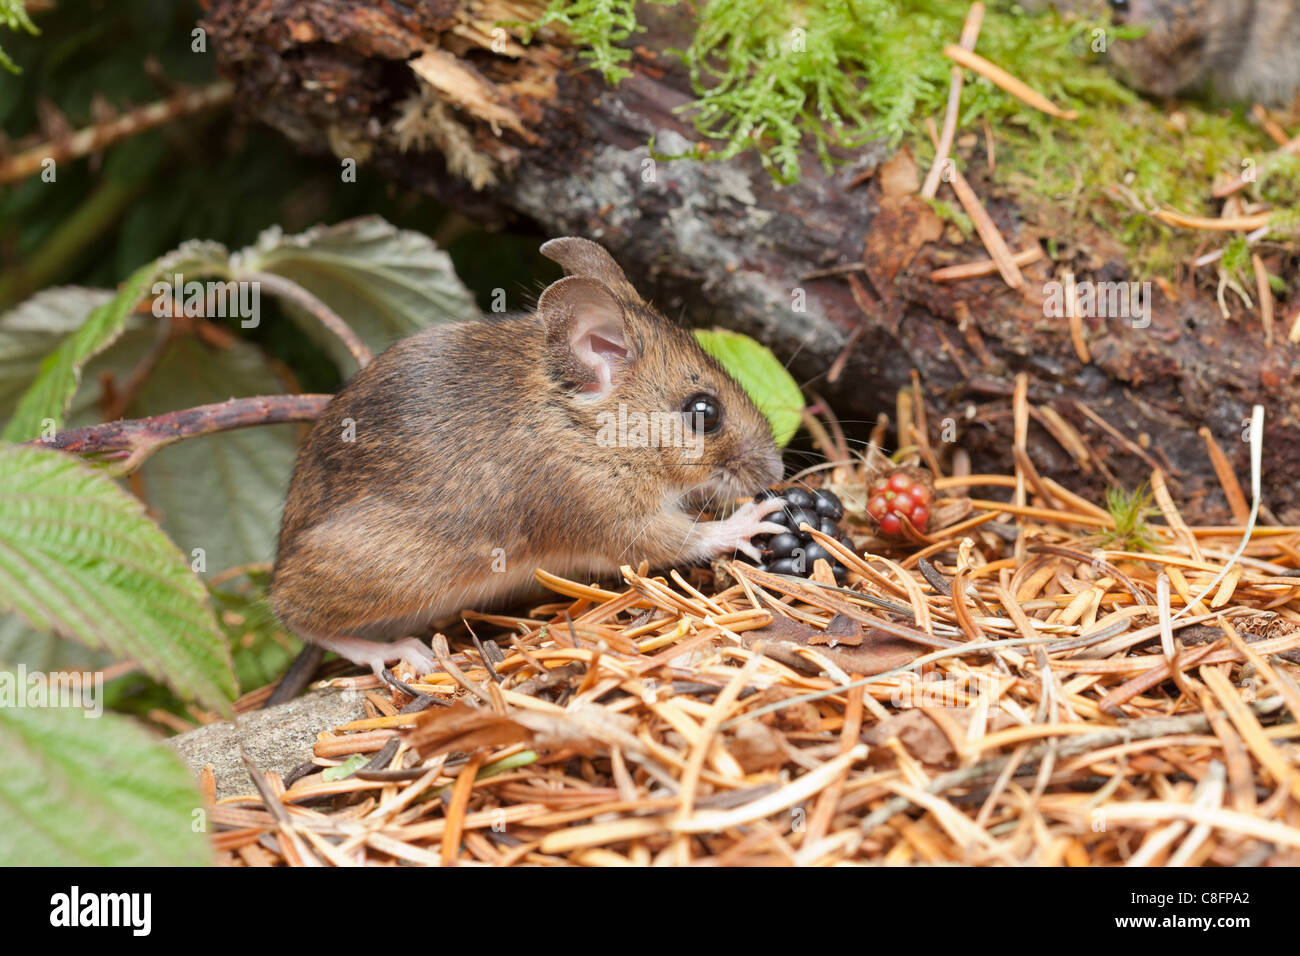 Woodmouse in a terrarium. Stock Photo